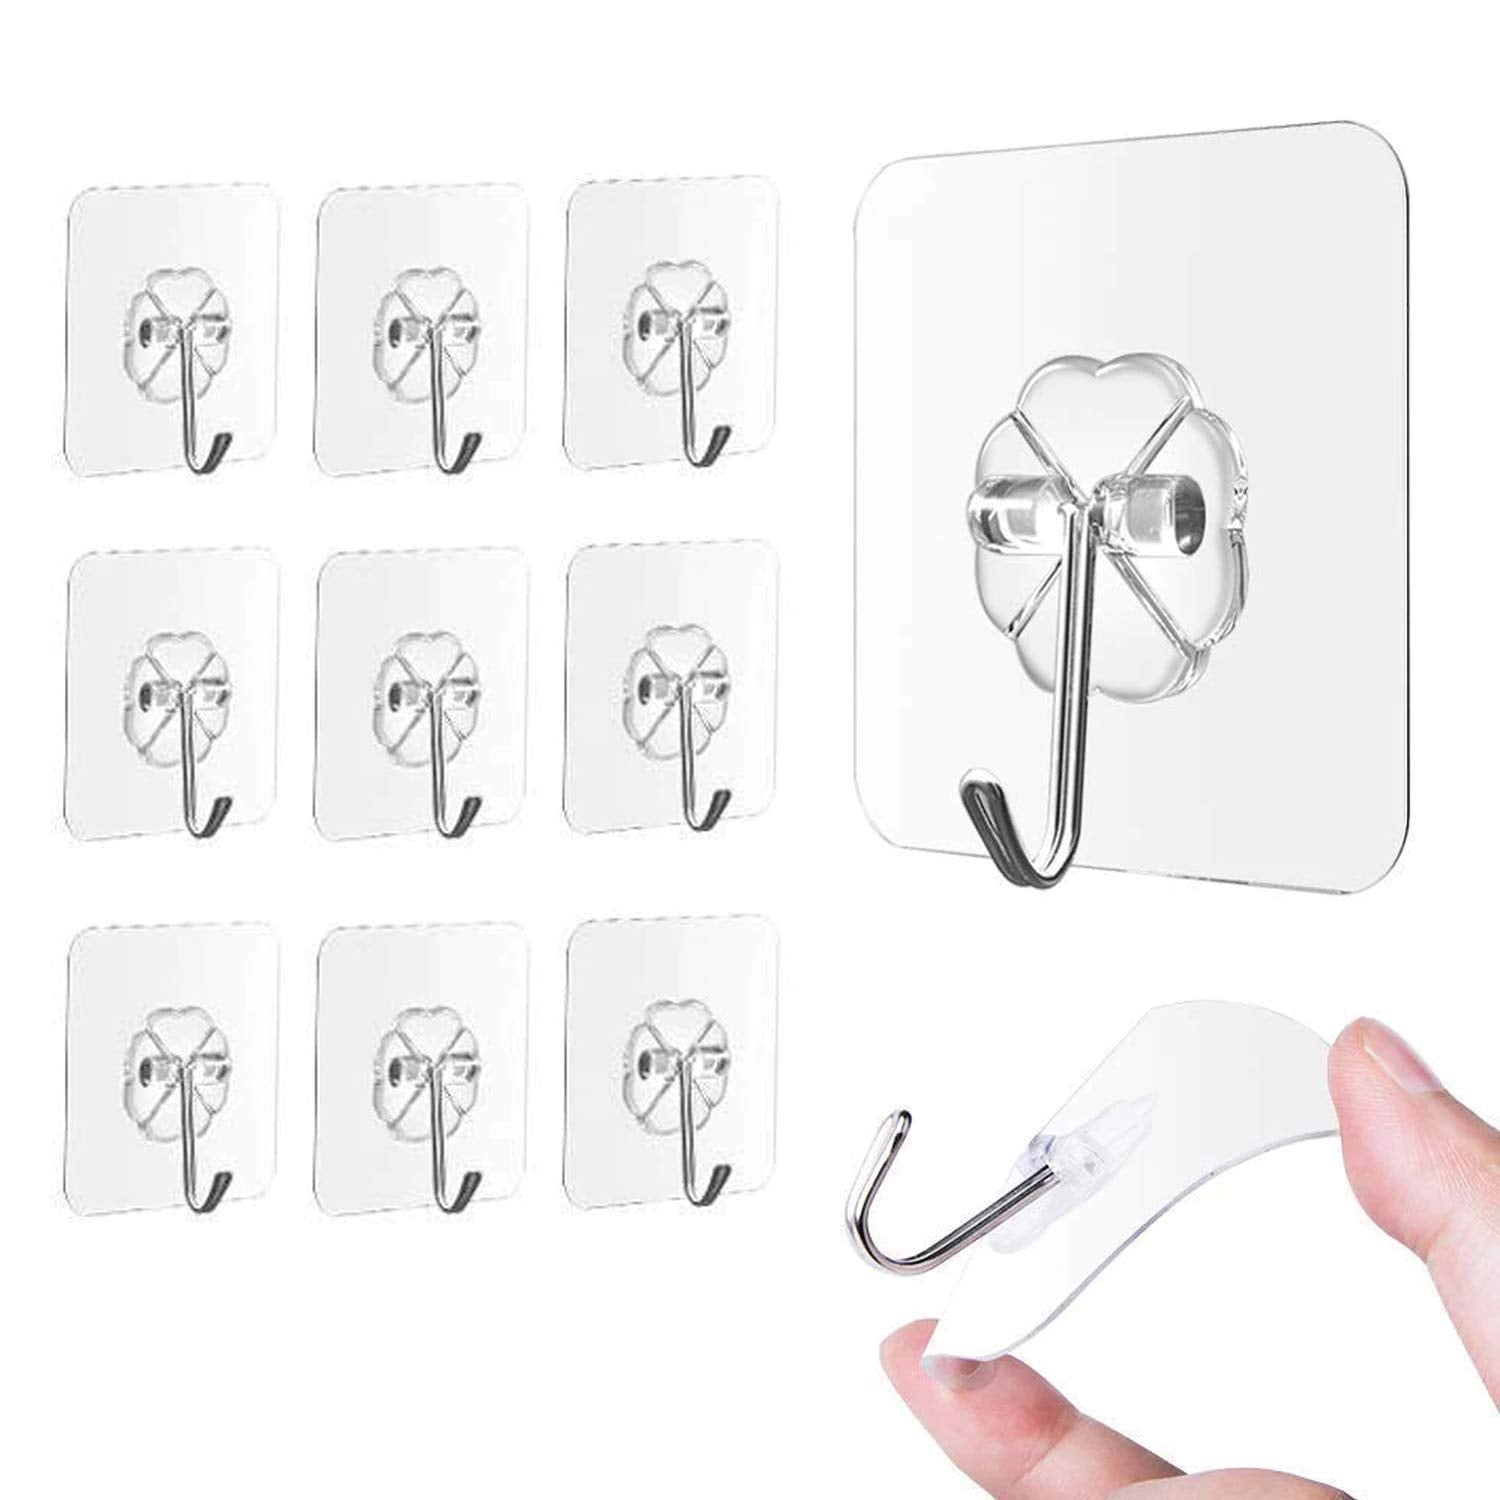 Adhesive Wall Sticky Hooks - CDesk Dropship